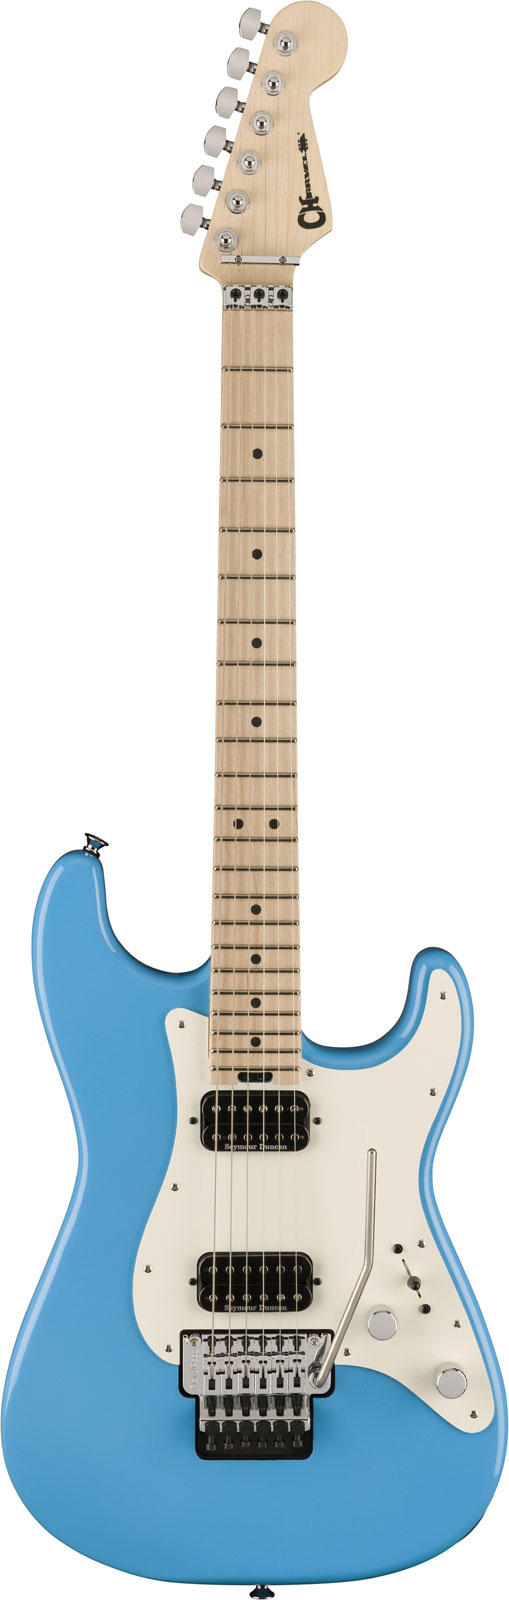 CHARVEL PRO-MOD SO-CAL STYLE 1 HH FR M MN INFINITY BLUE